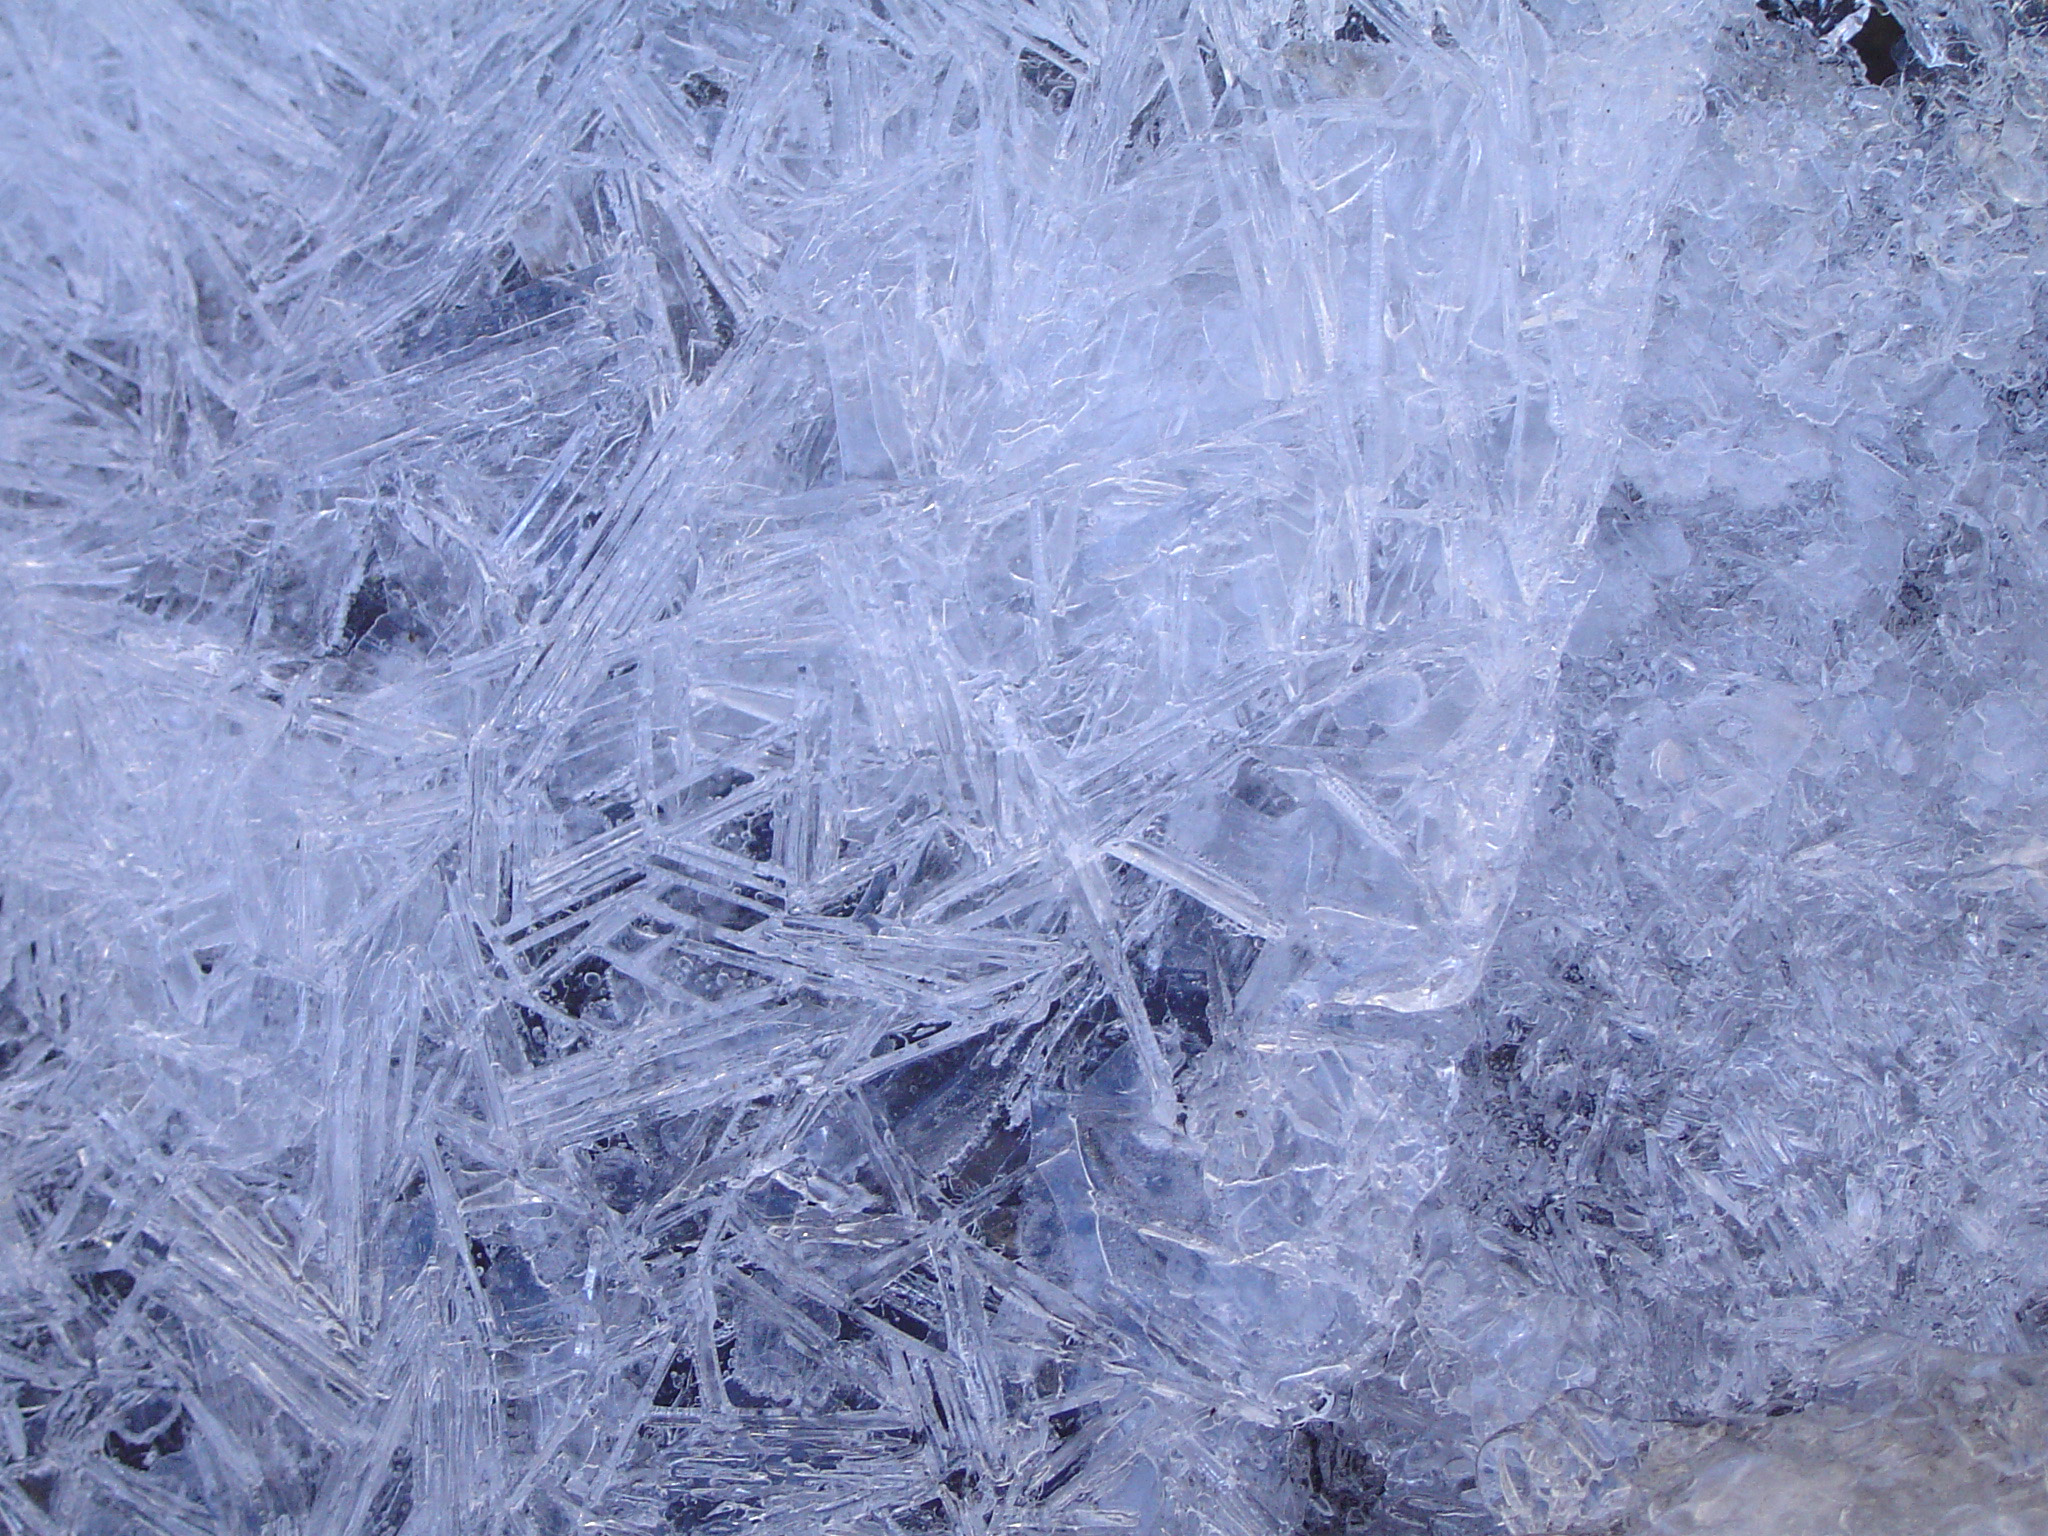 A close up of ice crystals on the ground, depicting the stunning physics of ice skating.